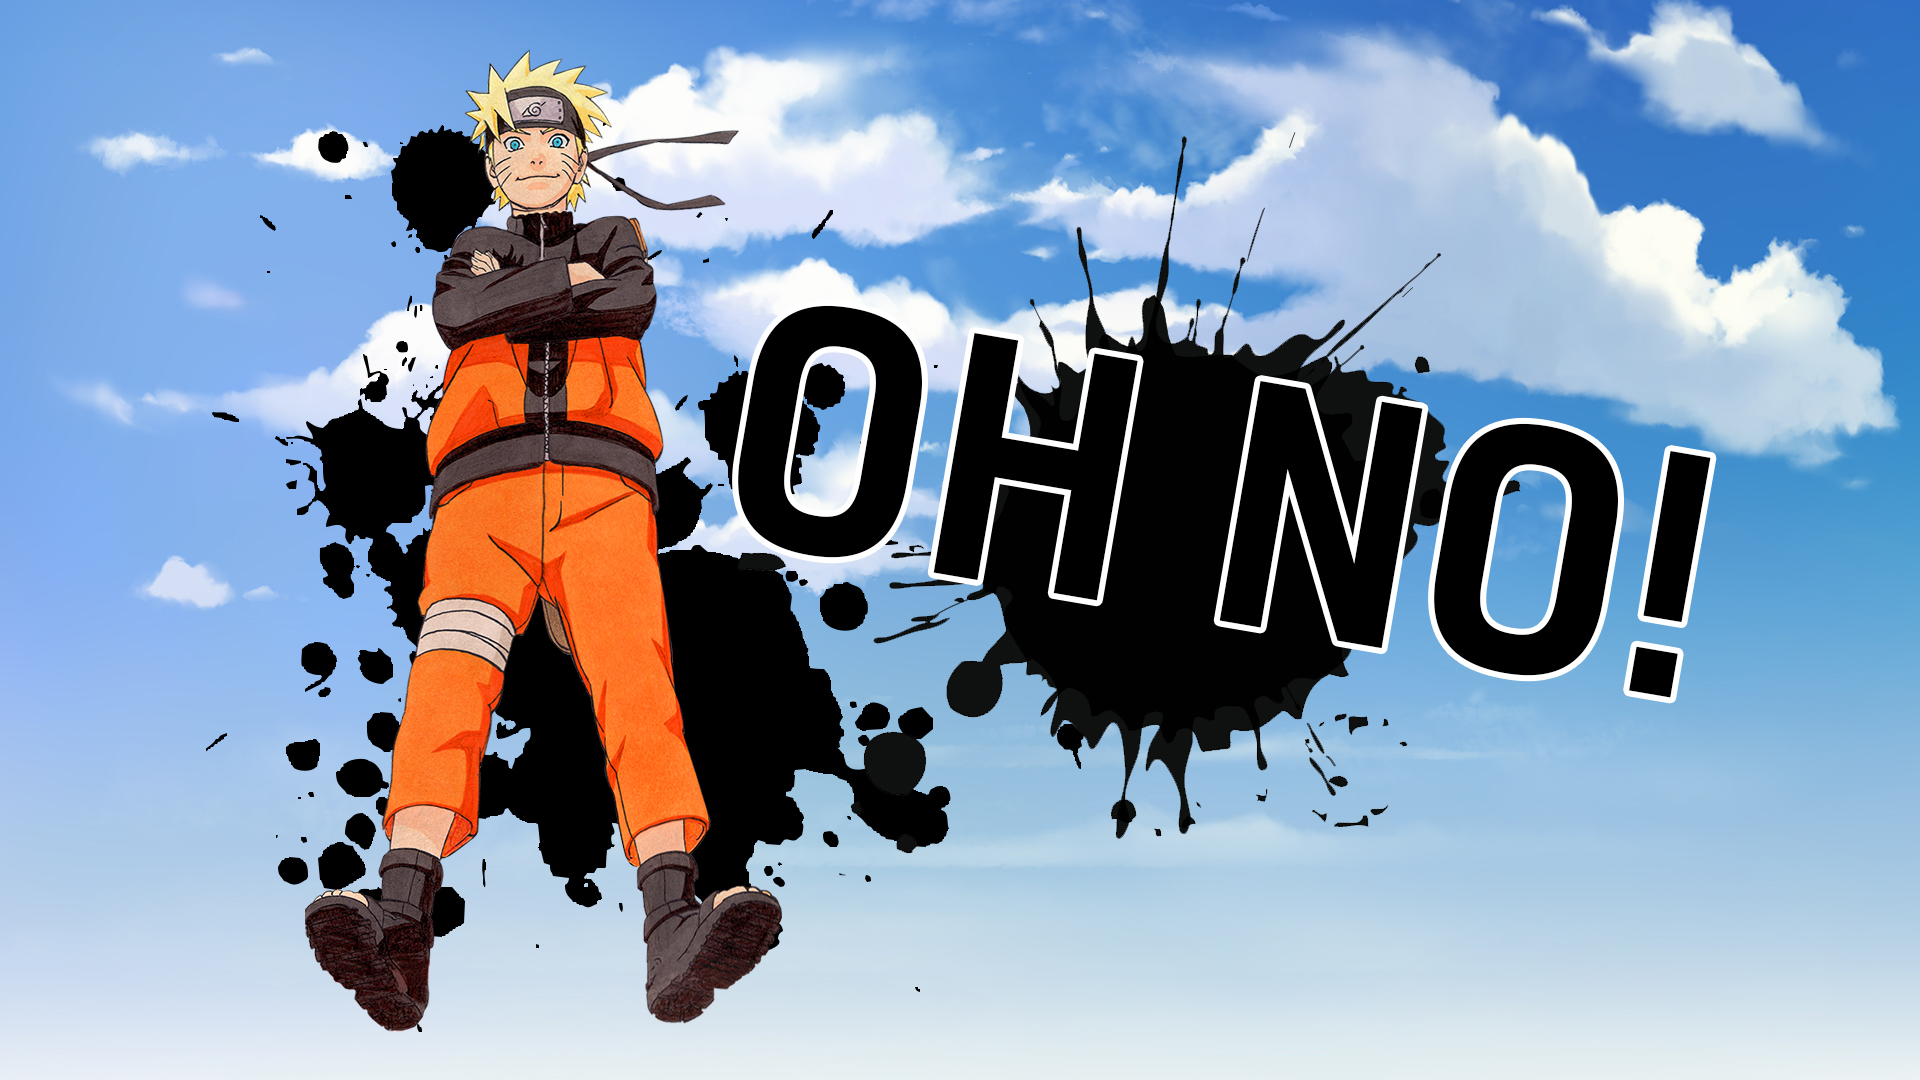 Naruto stands in the sky